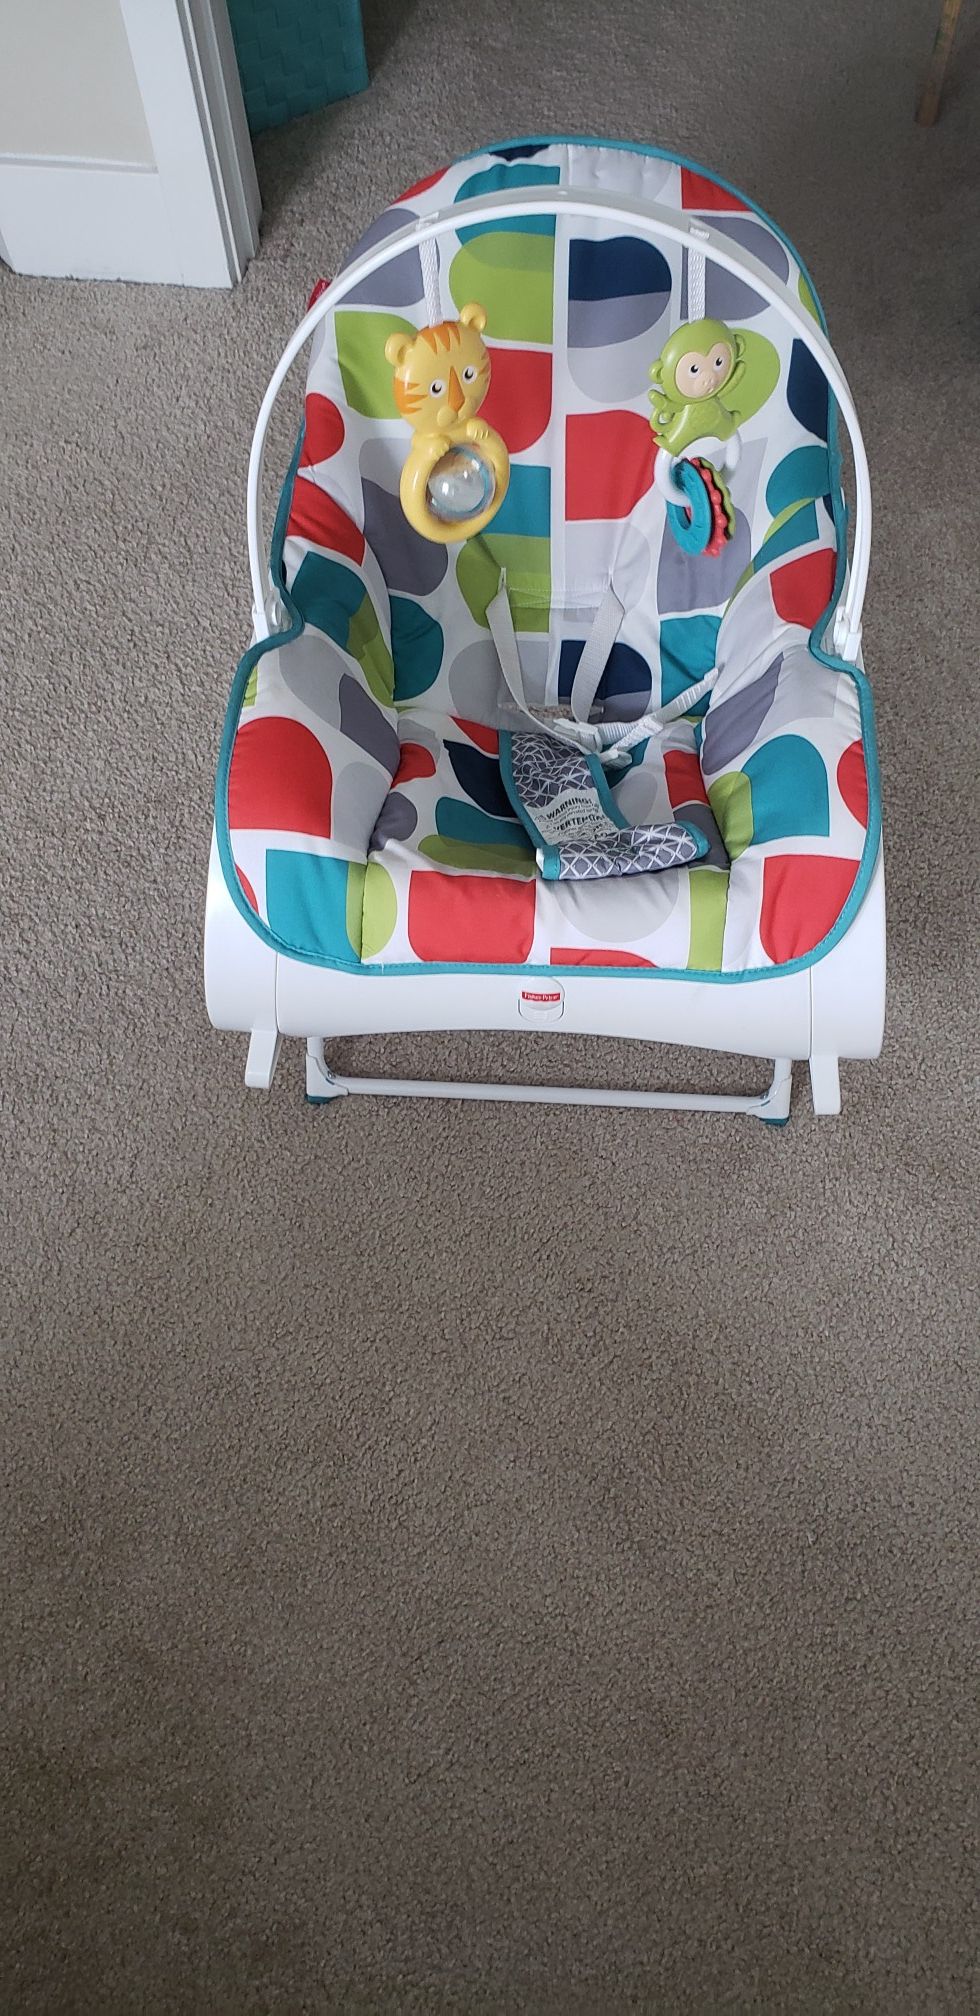 Rocking chair(Fisher price) and pillow (wellifes)